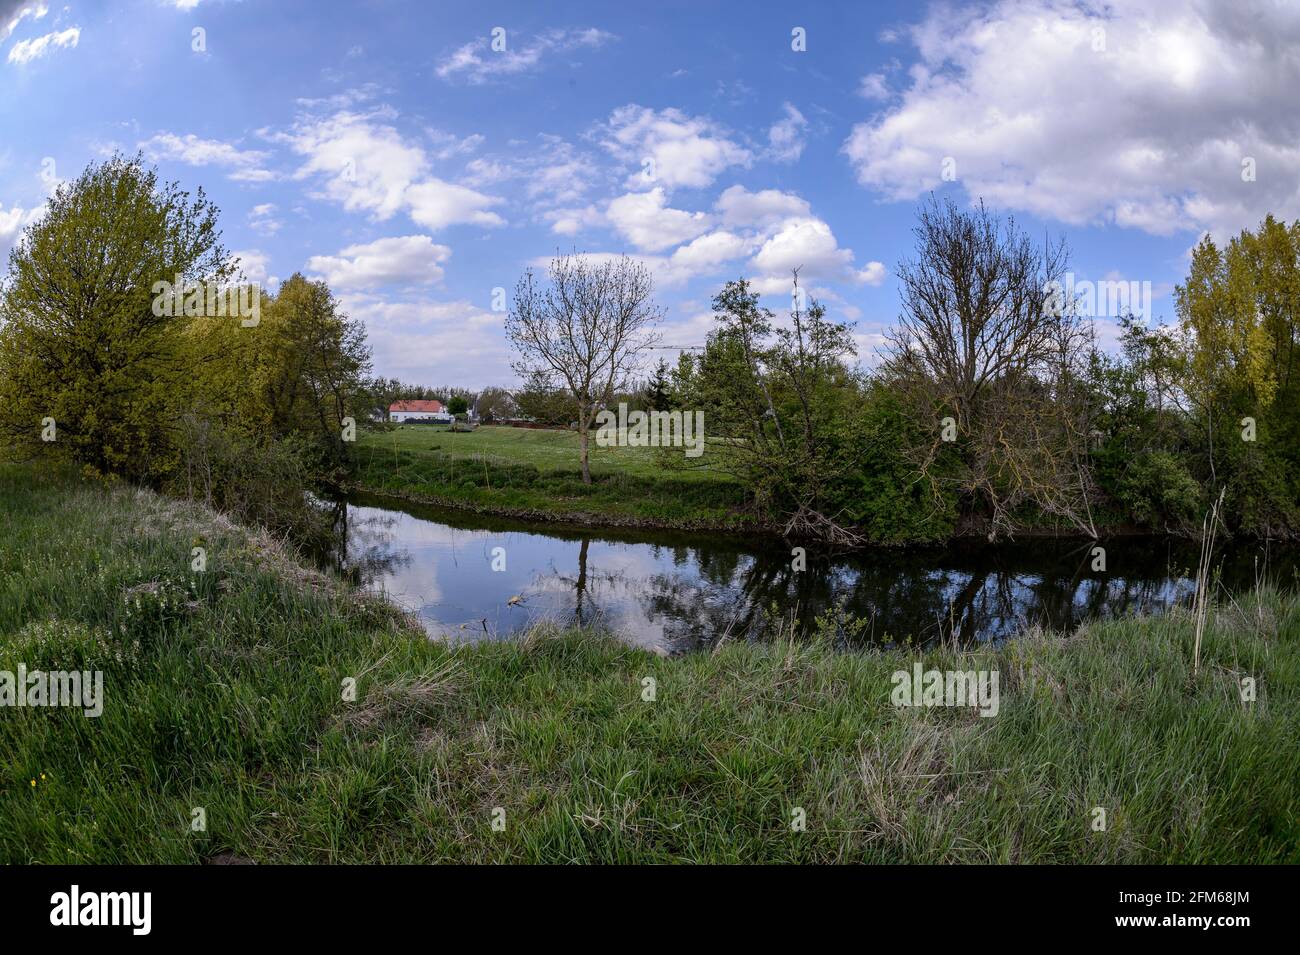 The river Zorn in the spring, Alsace, France. The river Zorn is a small tributary of the Rhine. The new leaves color the bucolic landsc Stock Photo